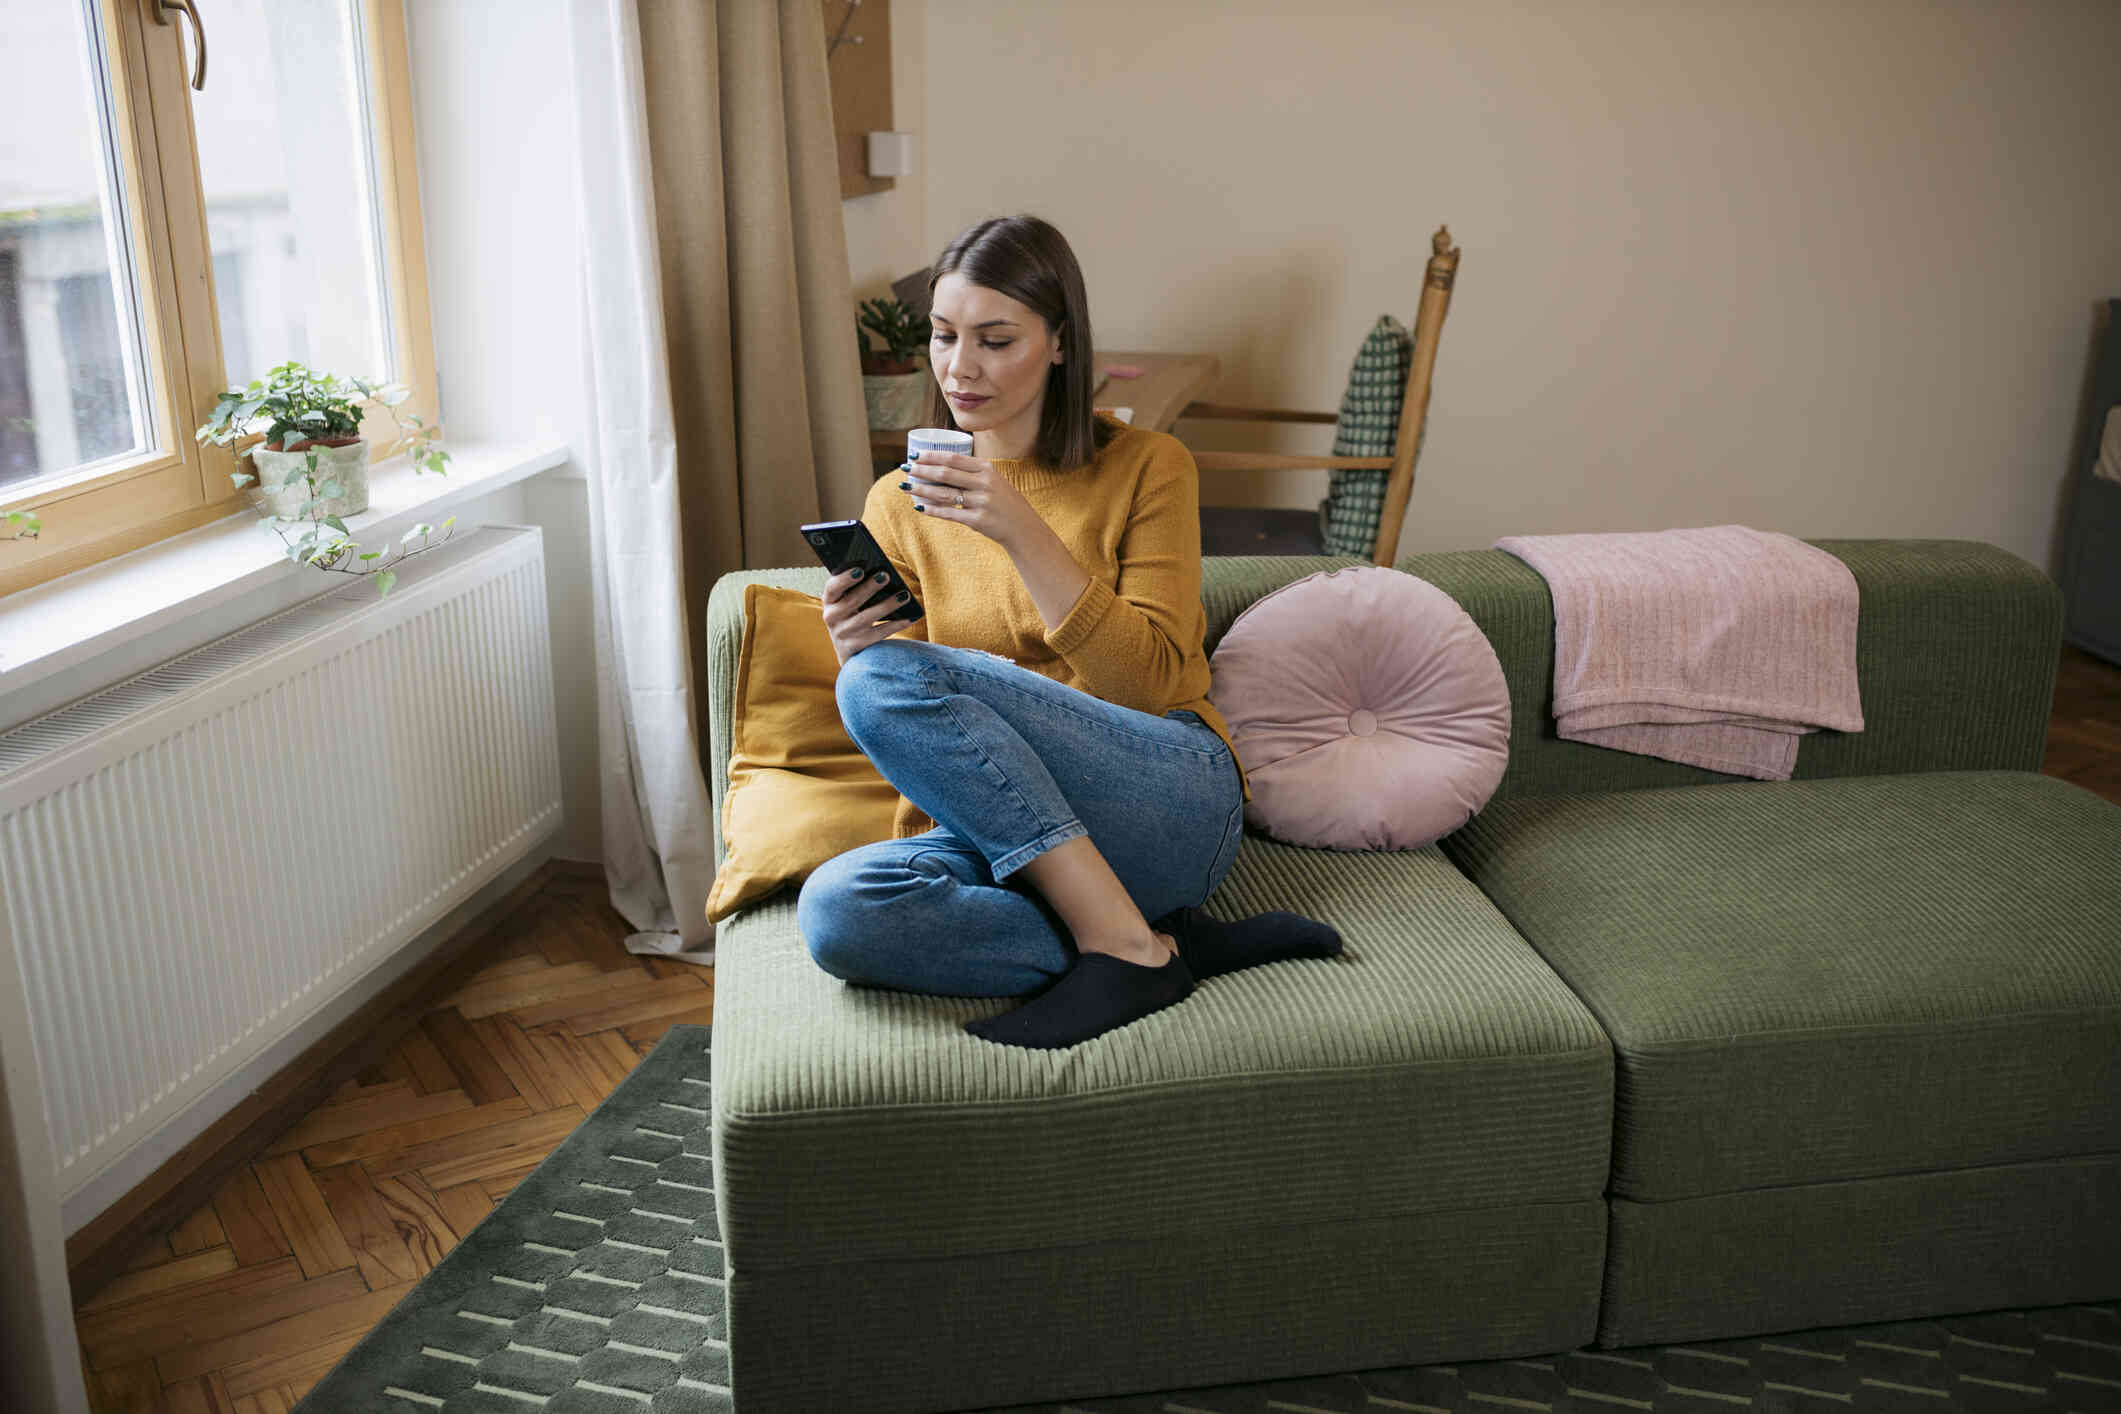 A woman in a yellow shirt sits curled up on a green couch with a cup of coffee while looking at the cellphone in her hand.